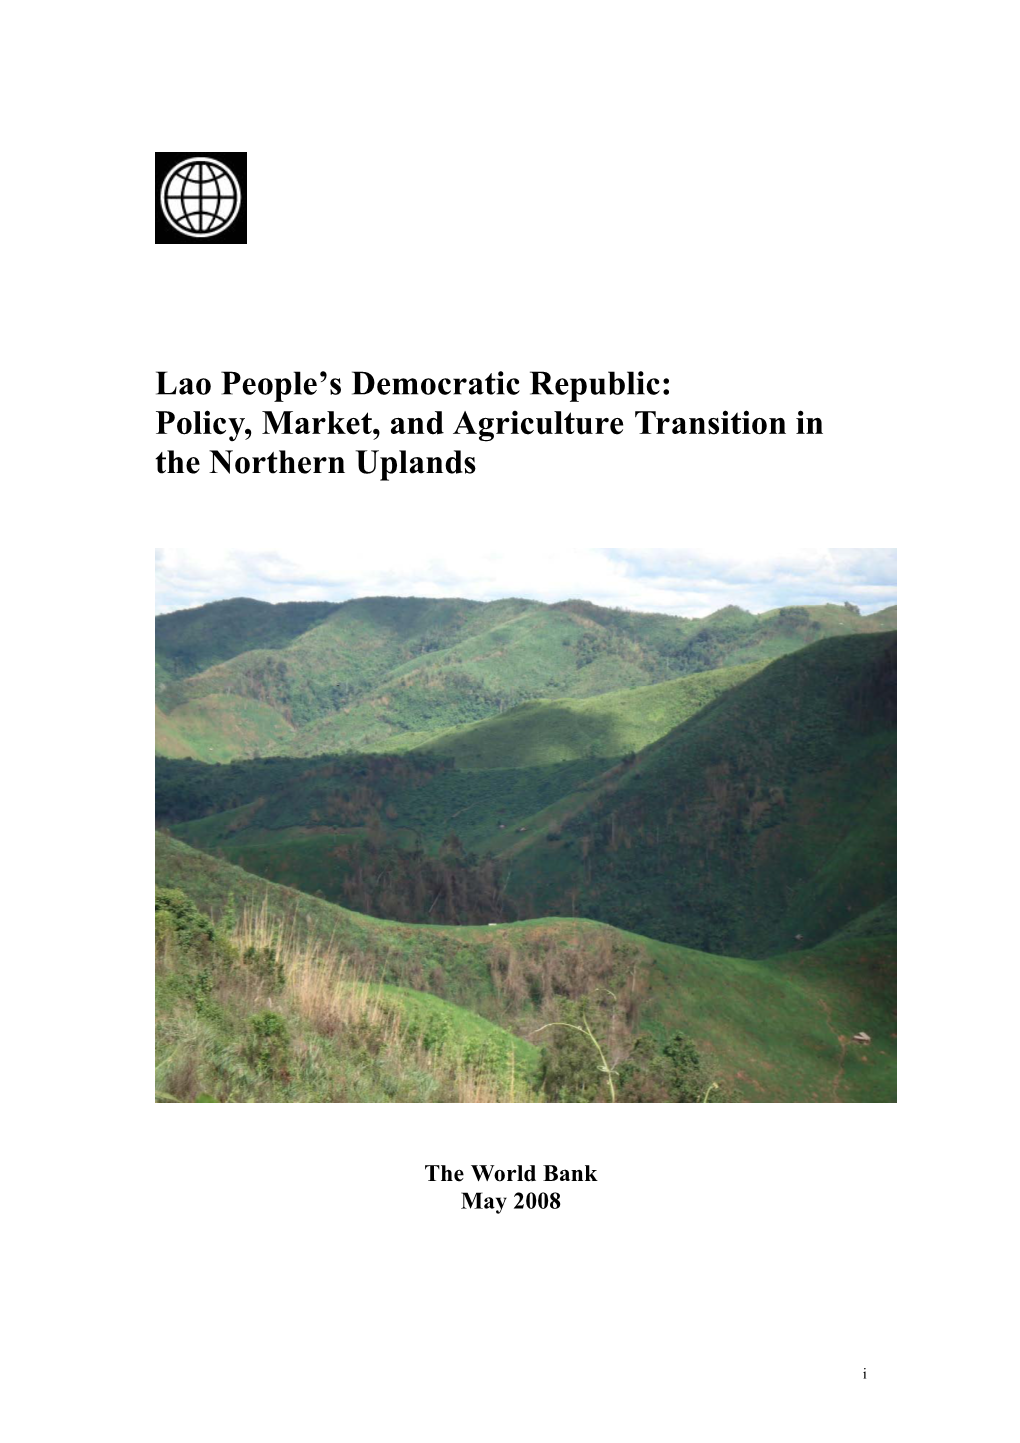 Lao People's Democratic Republic: Policy, Market, and Agriculture